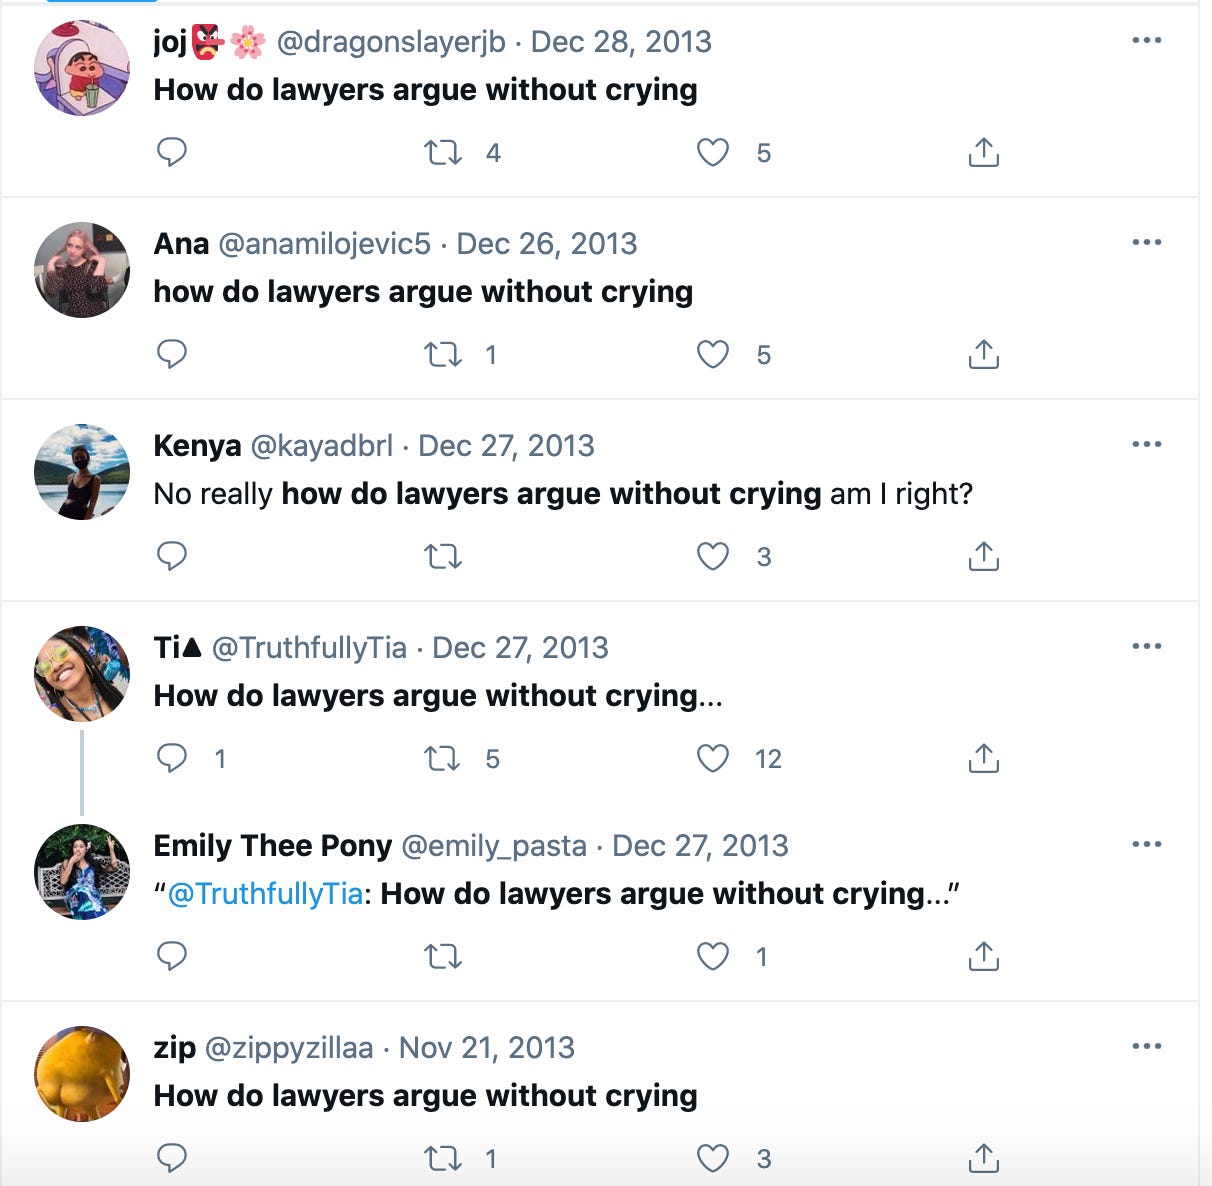 How do lawyers argue without crying tweets